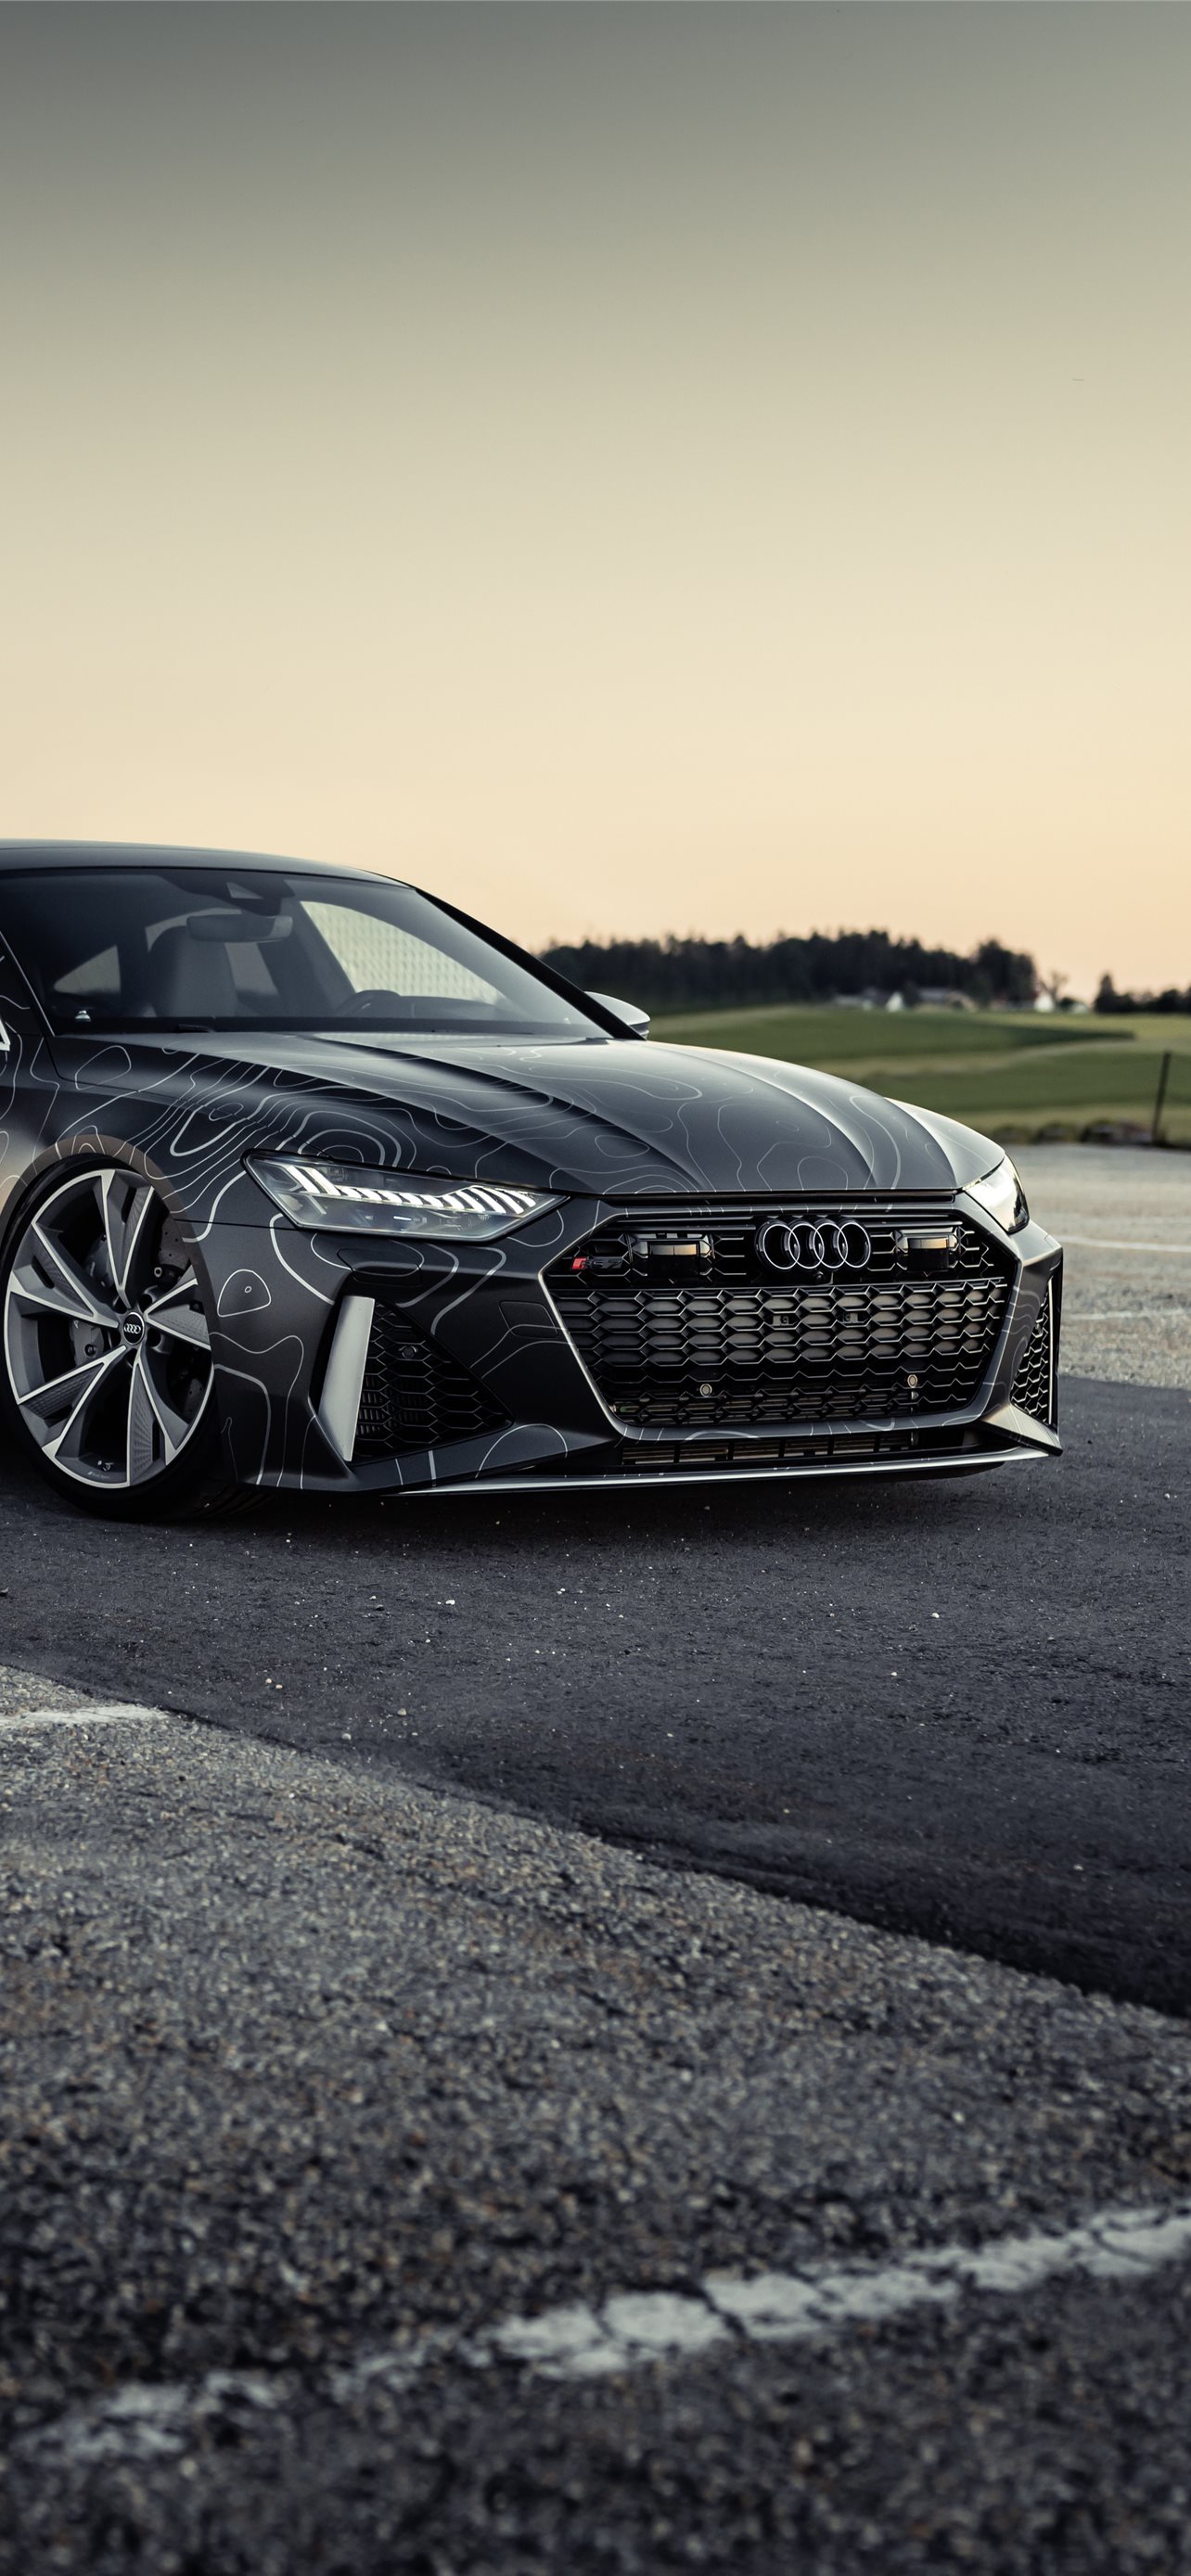 Audi Rs7 Pictures  Download Free Images on Unsplash